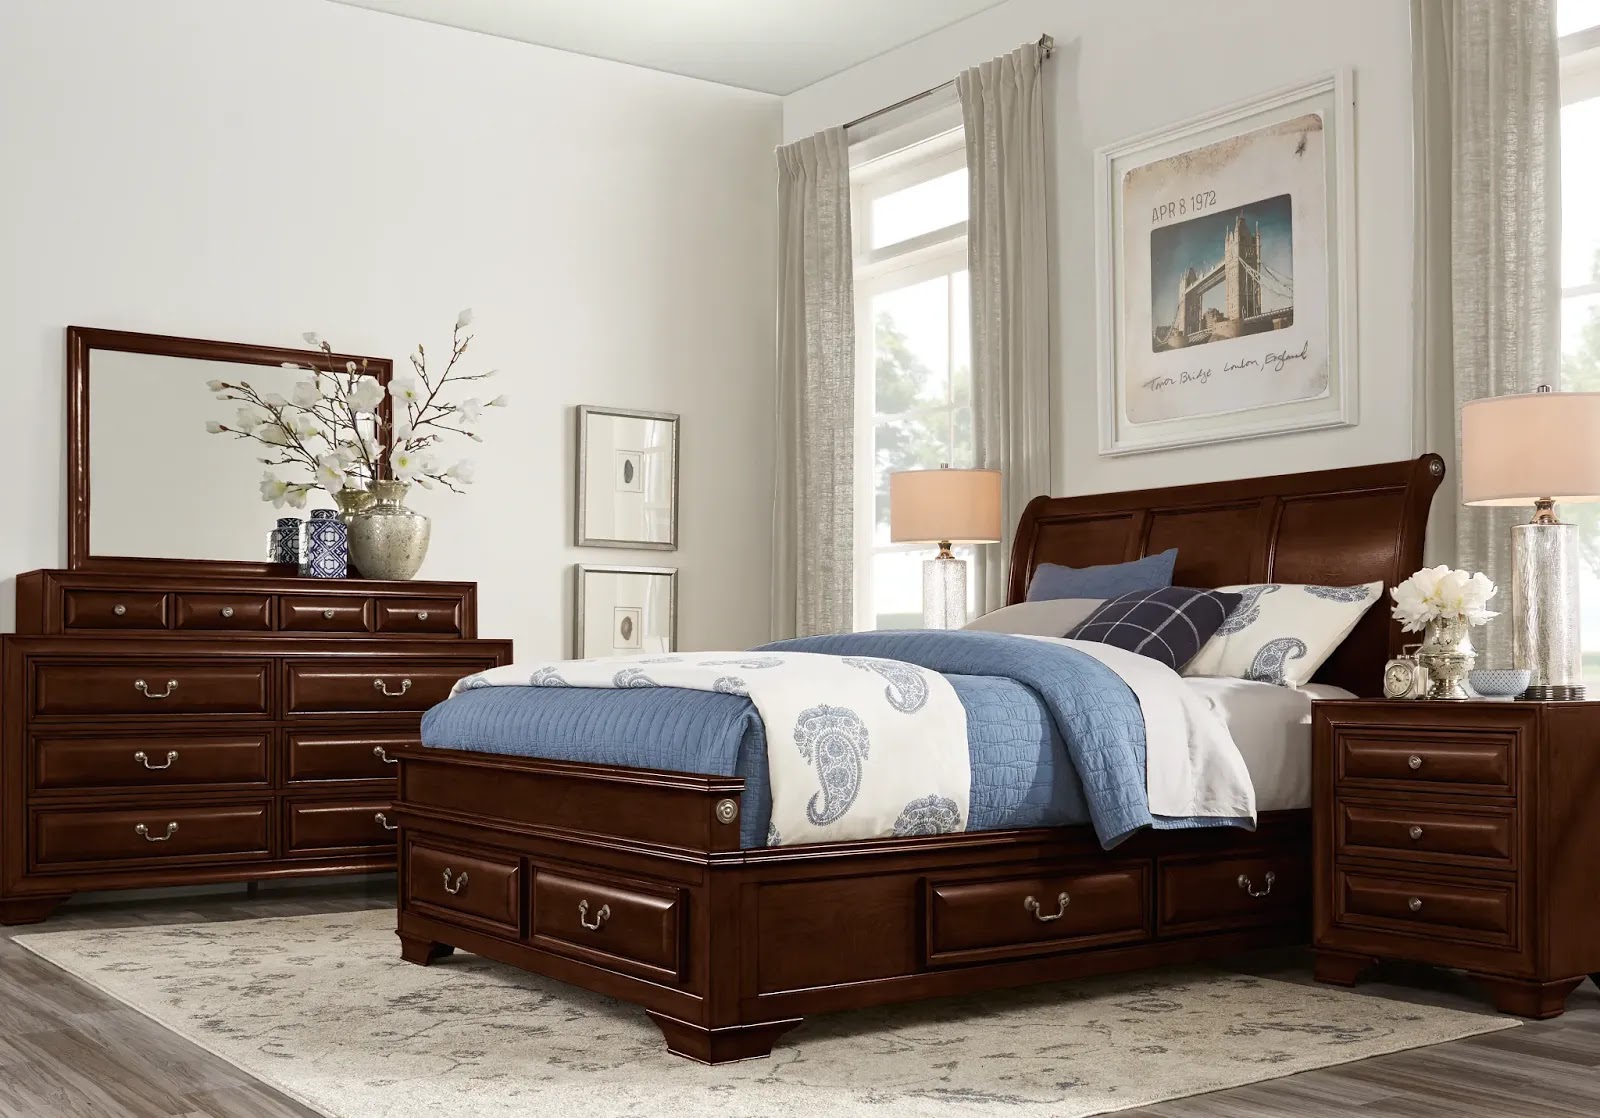 Used Bedroom Sets For Sale By Owner Mill Valley Ii Cherry 5 Pc Queen Sleigh Bedroom With Storage